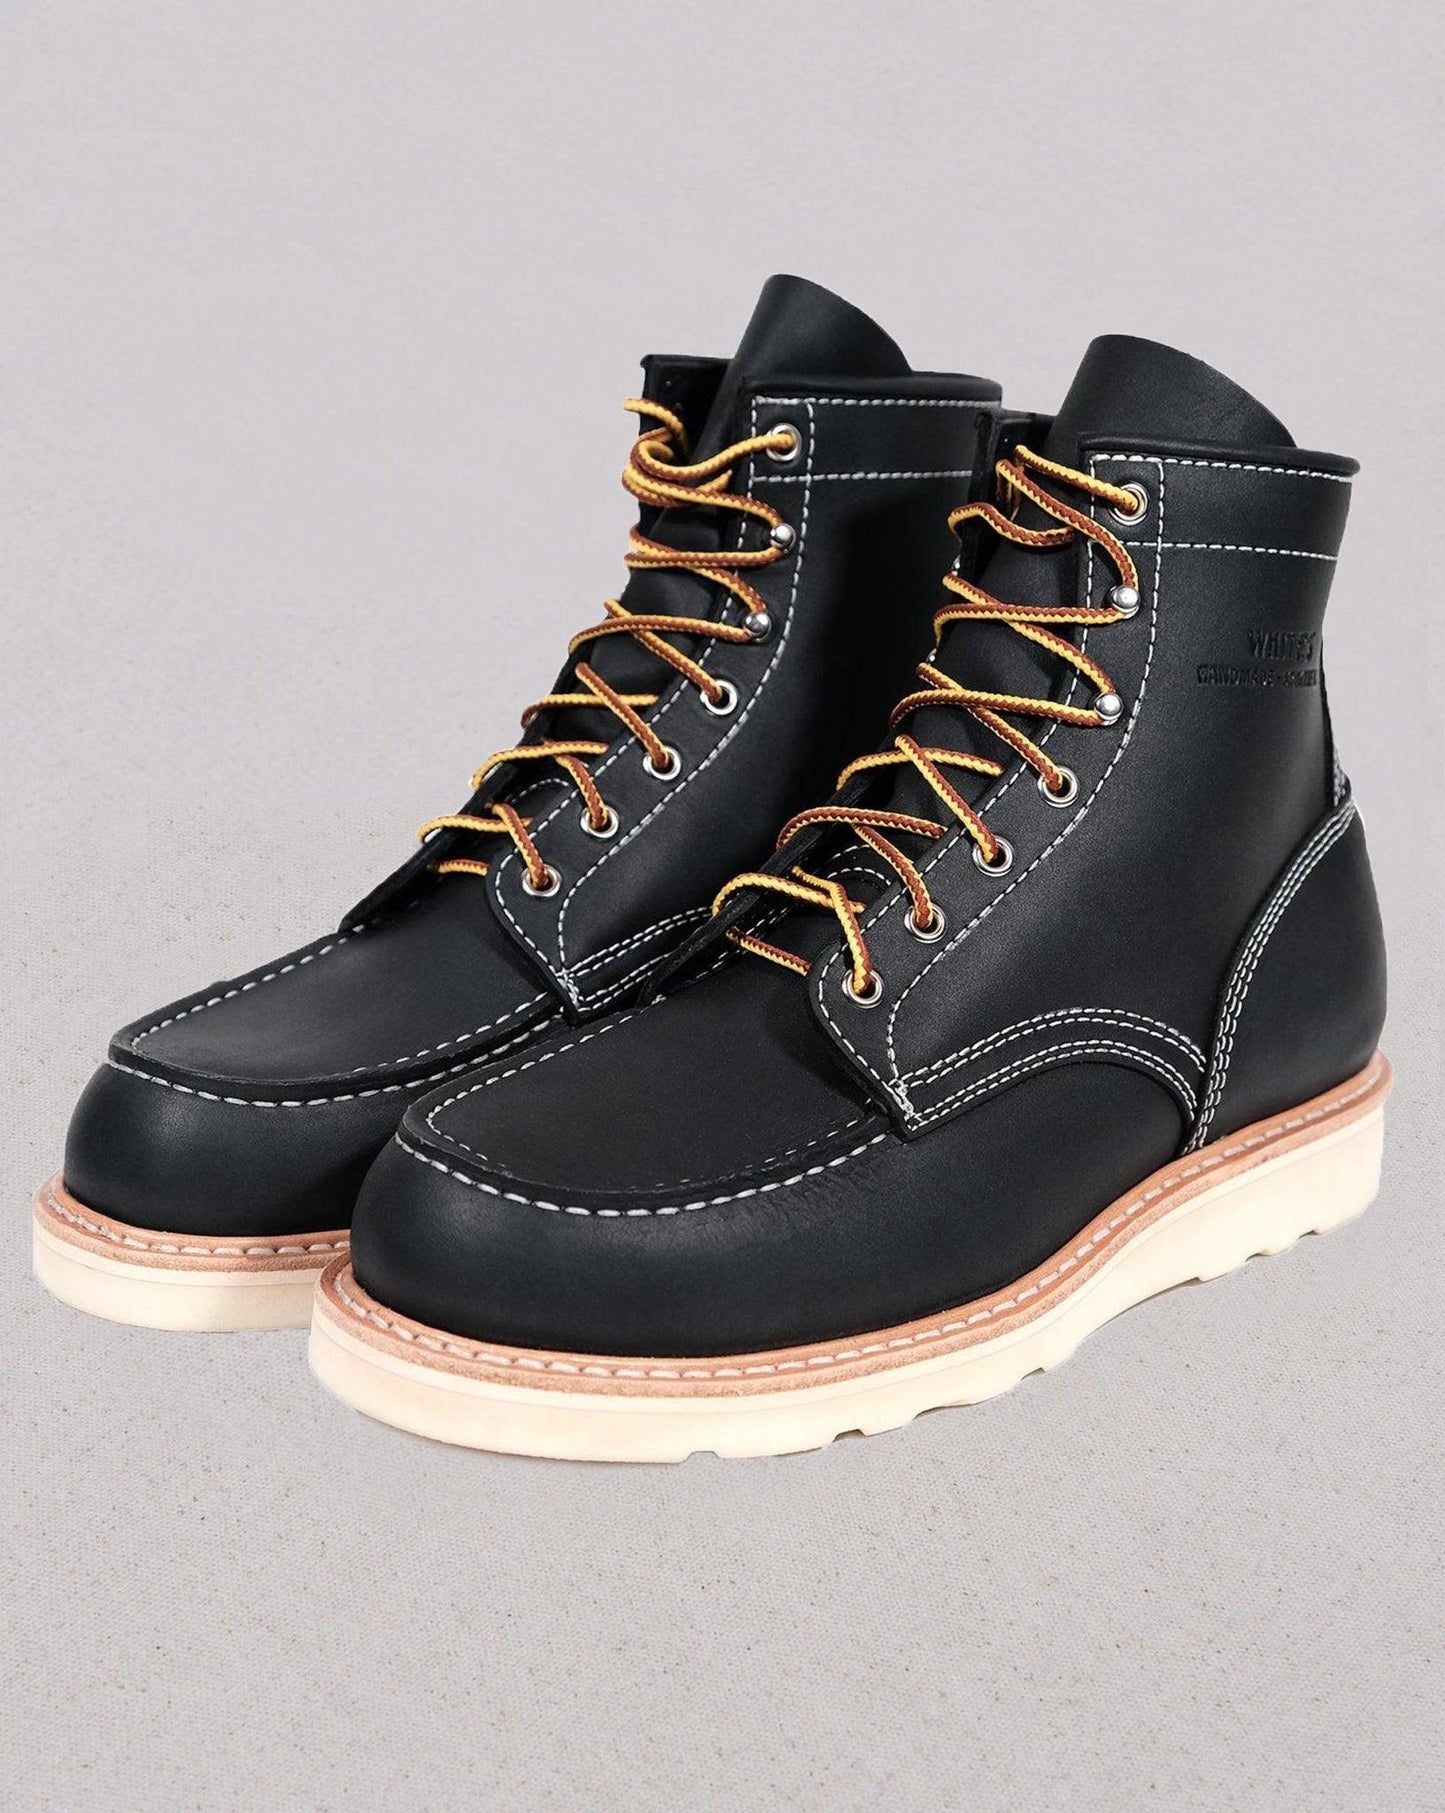 White's Boots Perry Moc Toe - Black -Whites Boots - URAHARA